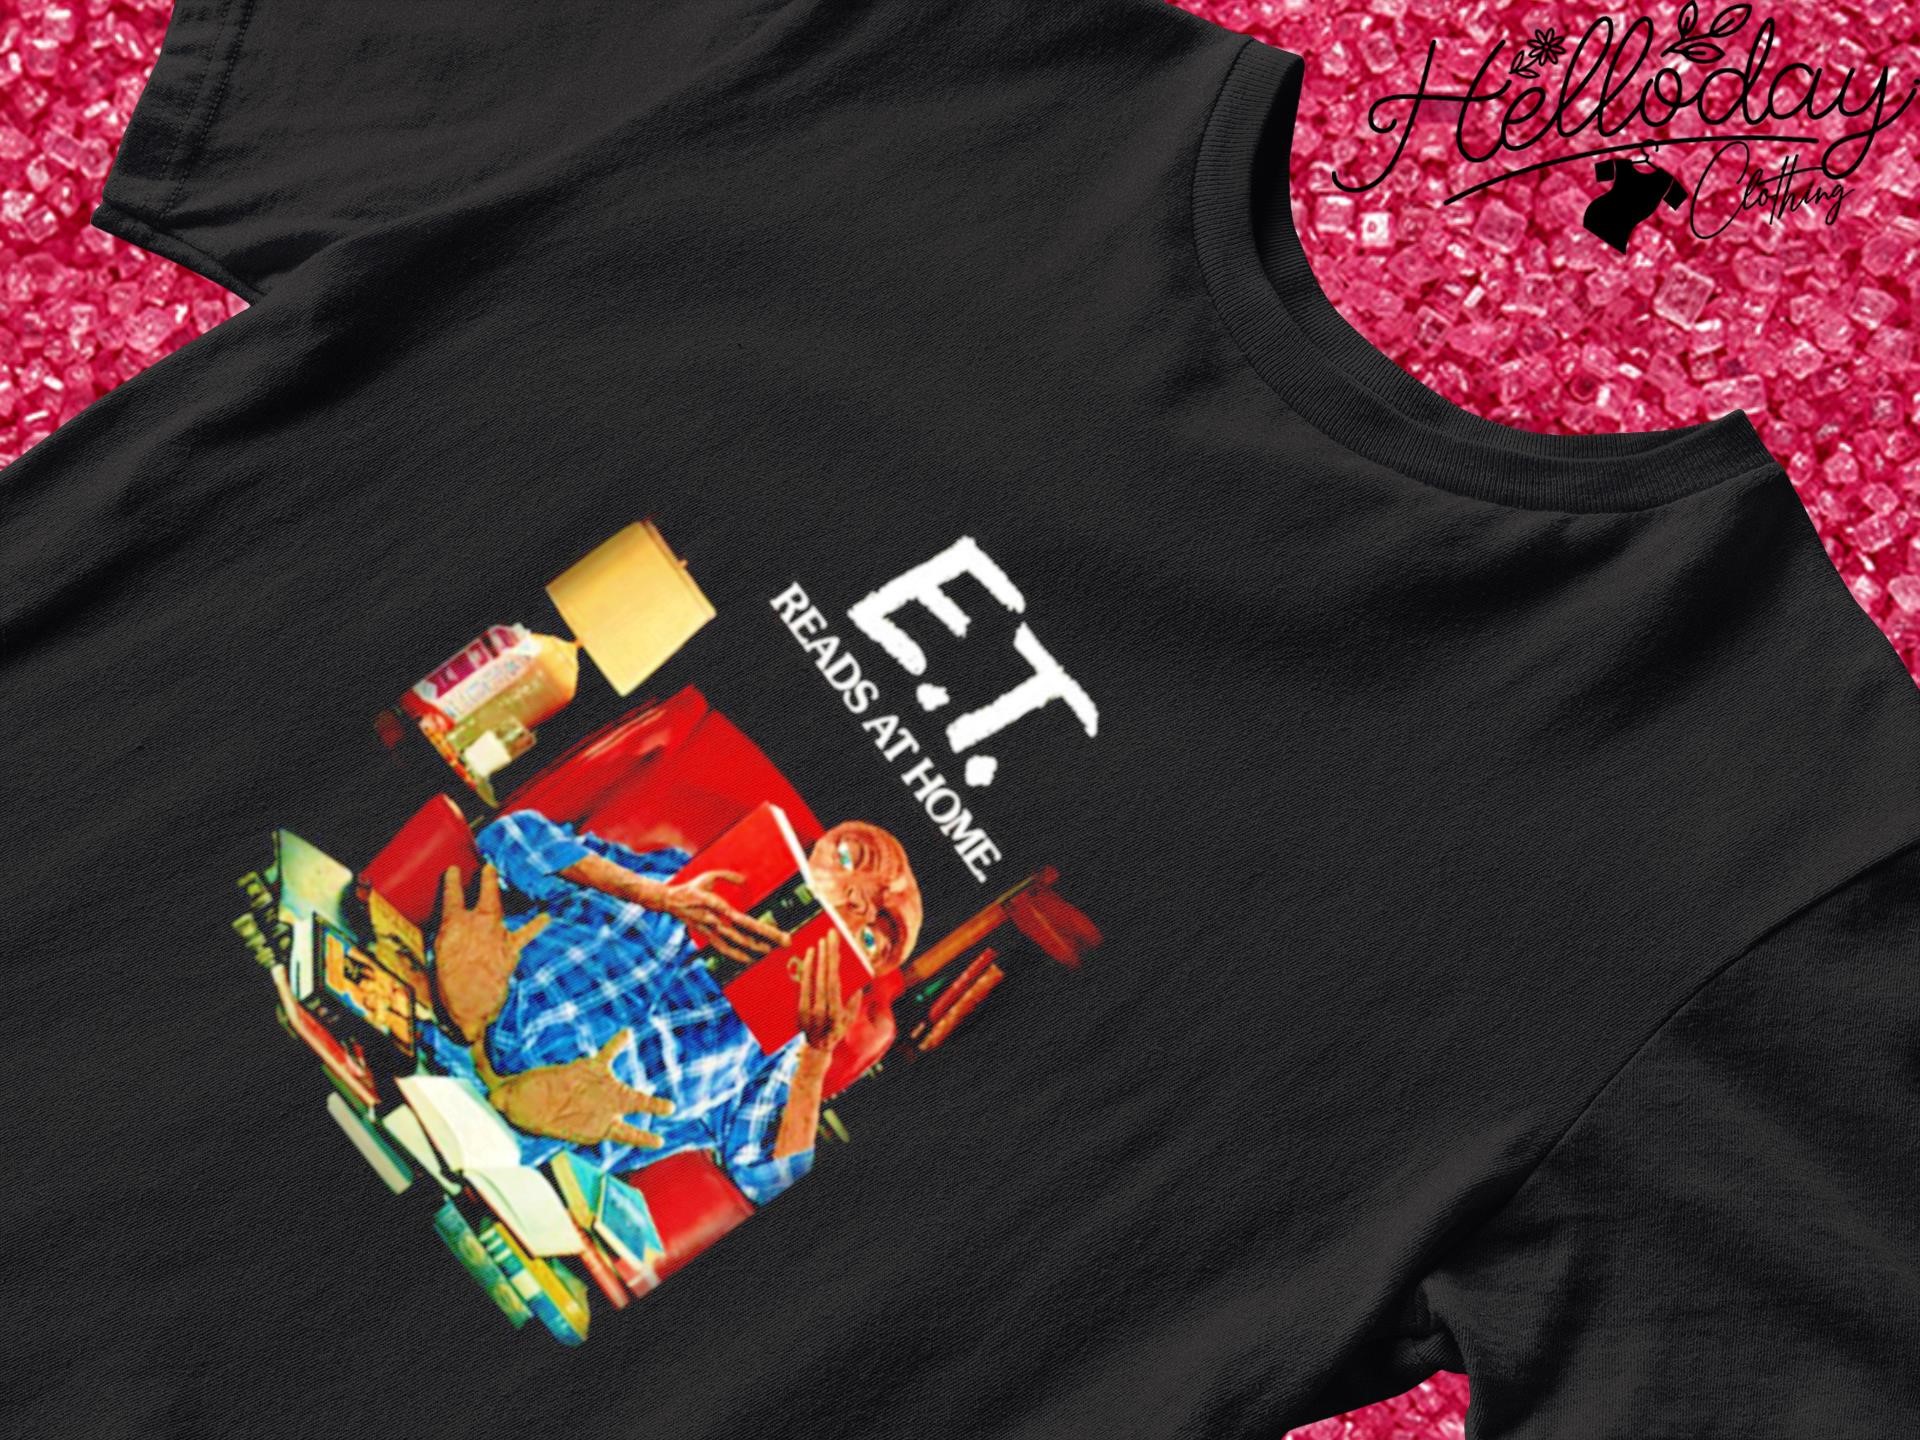 E.T. Reads at Home shirt